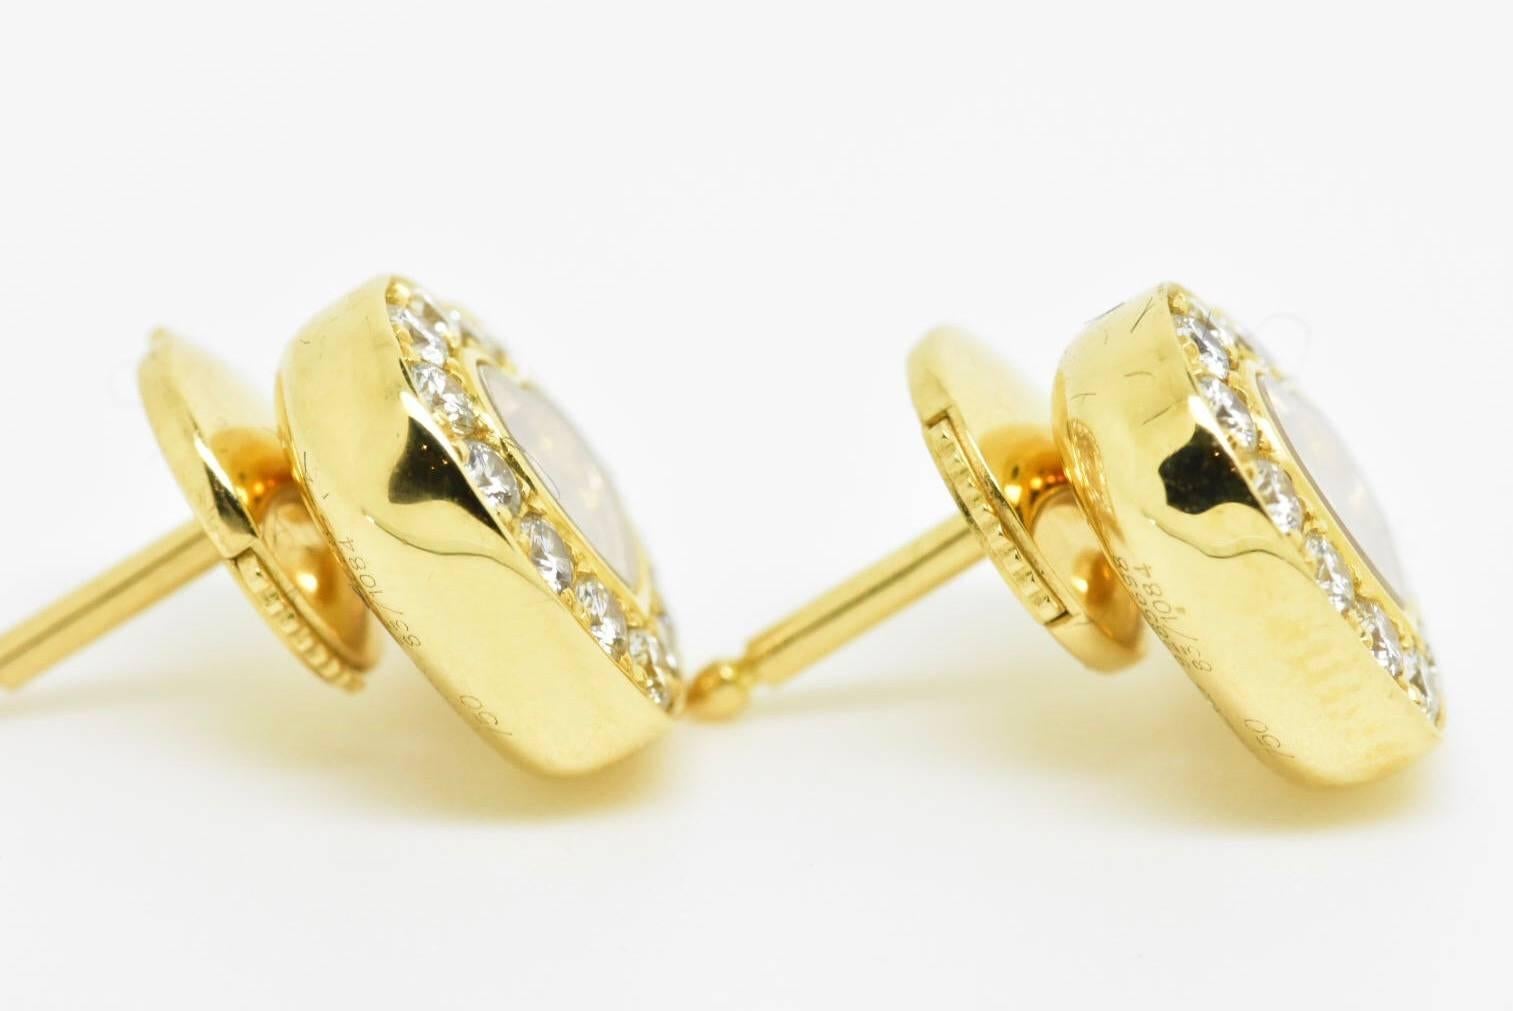 Chopard 'Happy Diamonds' Icons earrings set in 18k yellow Gold. Each earring is designed with a free moving diamond held between two sapphire crystals with a diamond set border. Retail price £3,990
Hallmarks: Chopard, 9285698 83/1084. 
Estimated